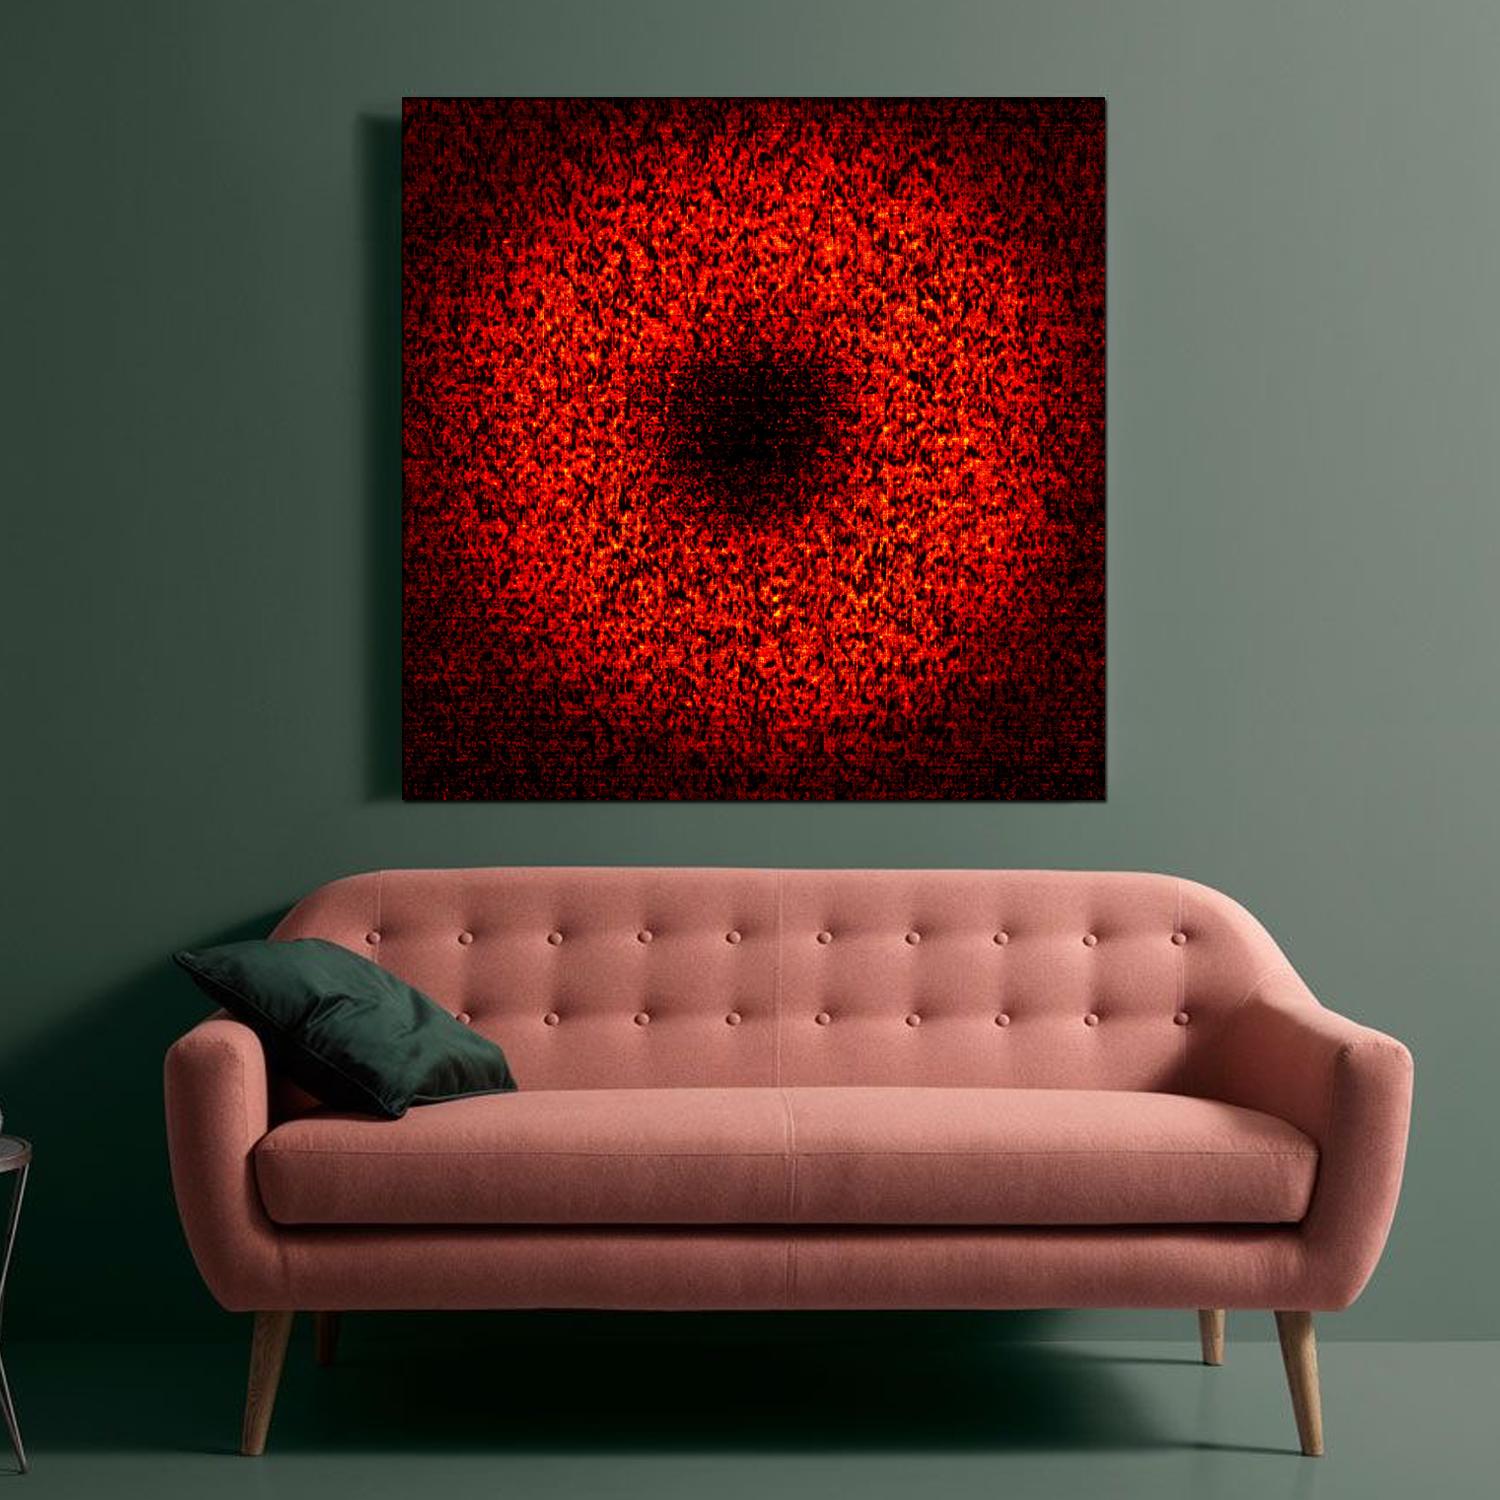 Heuristic #01-1 [Black, Red, 3D, Lenticular, New media, Circle, Galaxy, Space] - New Media Painting by Sungyong Hong